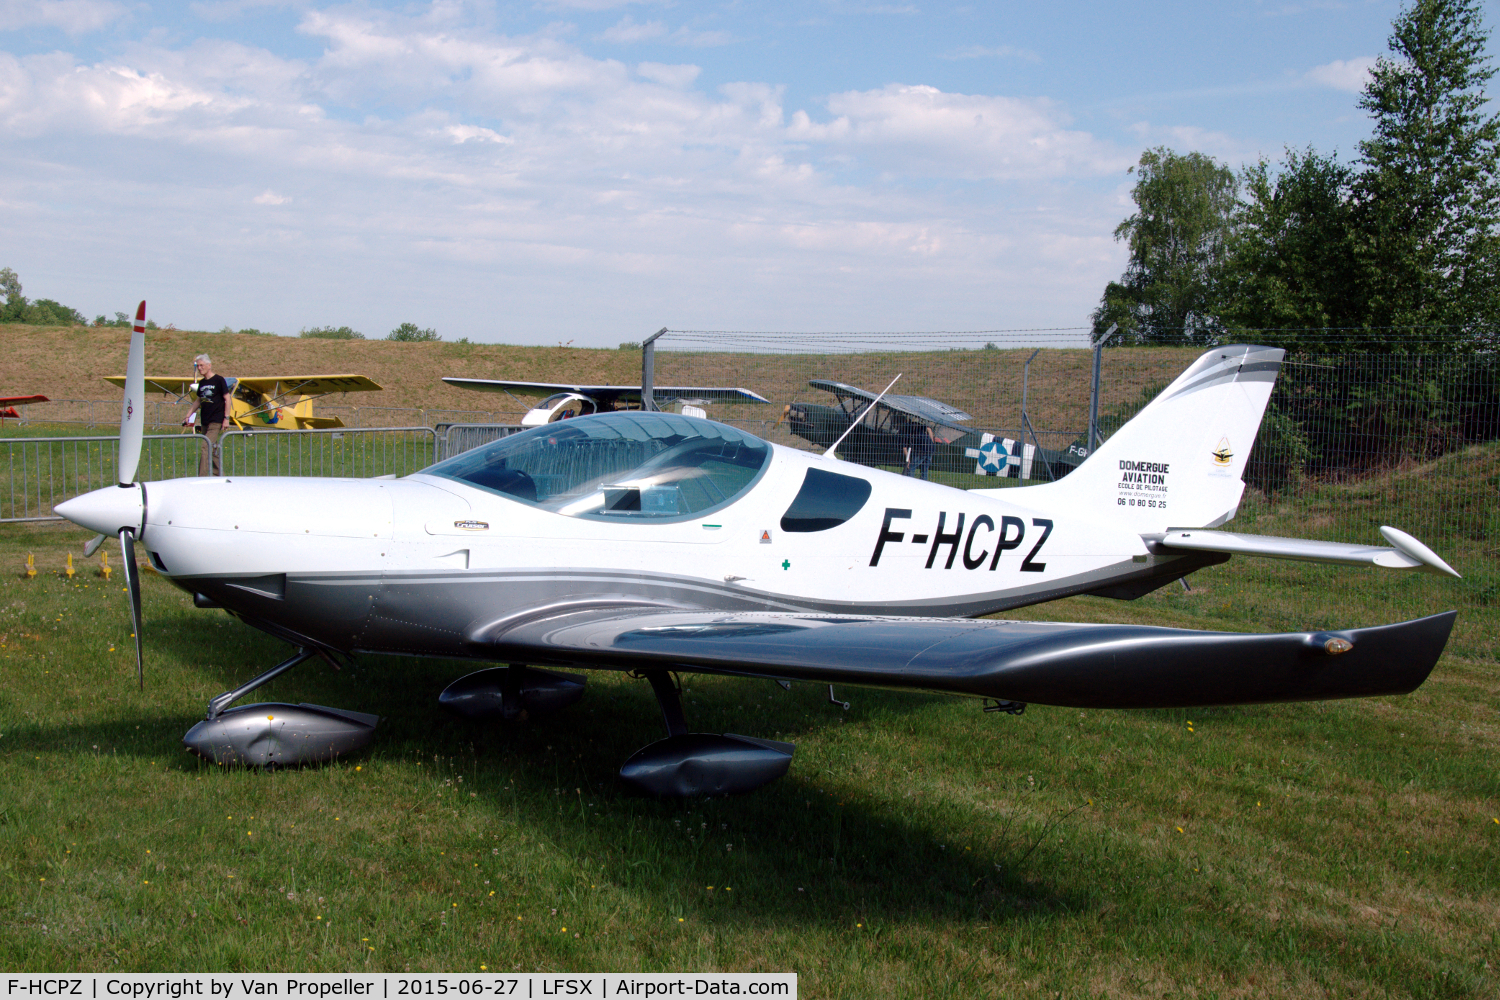 F-HCPZ, 2013 Czech Sport PS-28 Cruiser C/N C0489, Czech Sport PS-28 Cruiser parked at Luxeuil Air Base, France, for the 2015 Air Meeting.